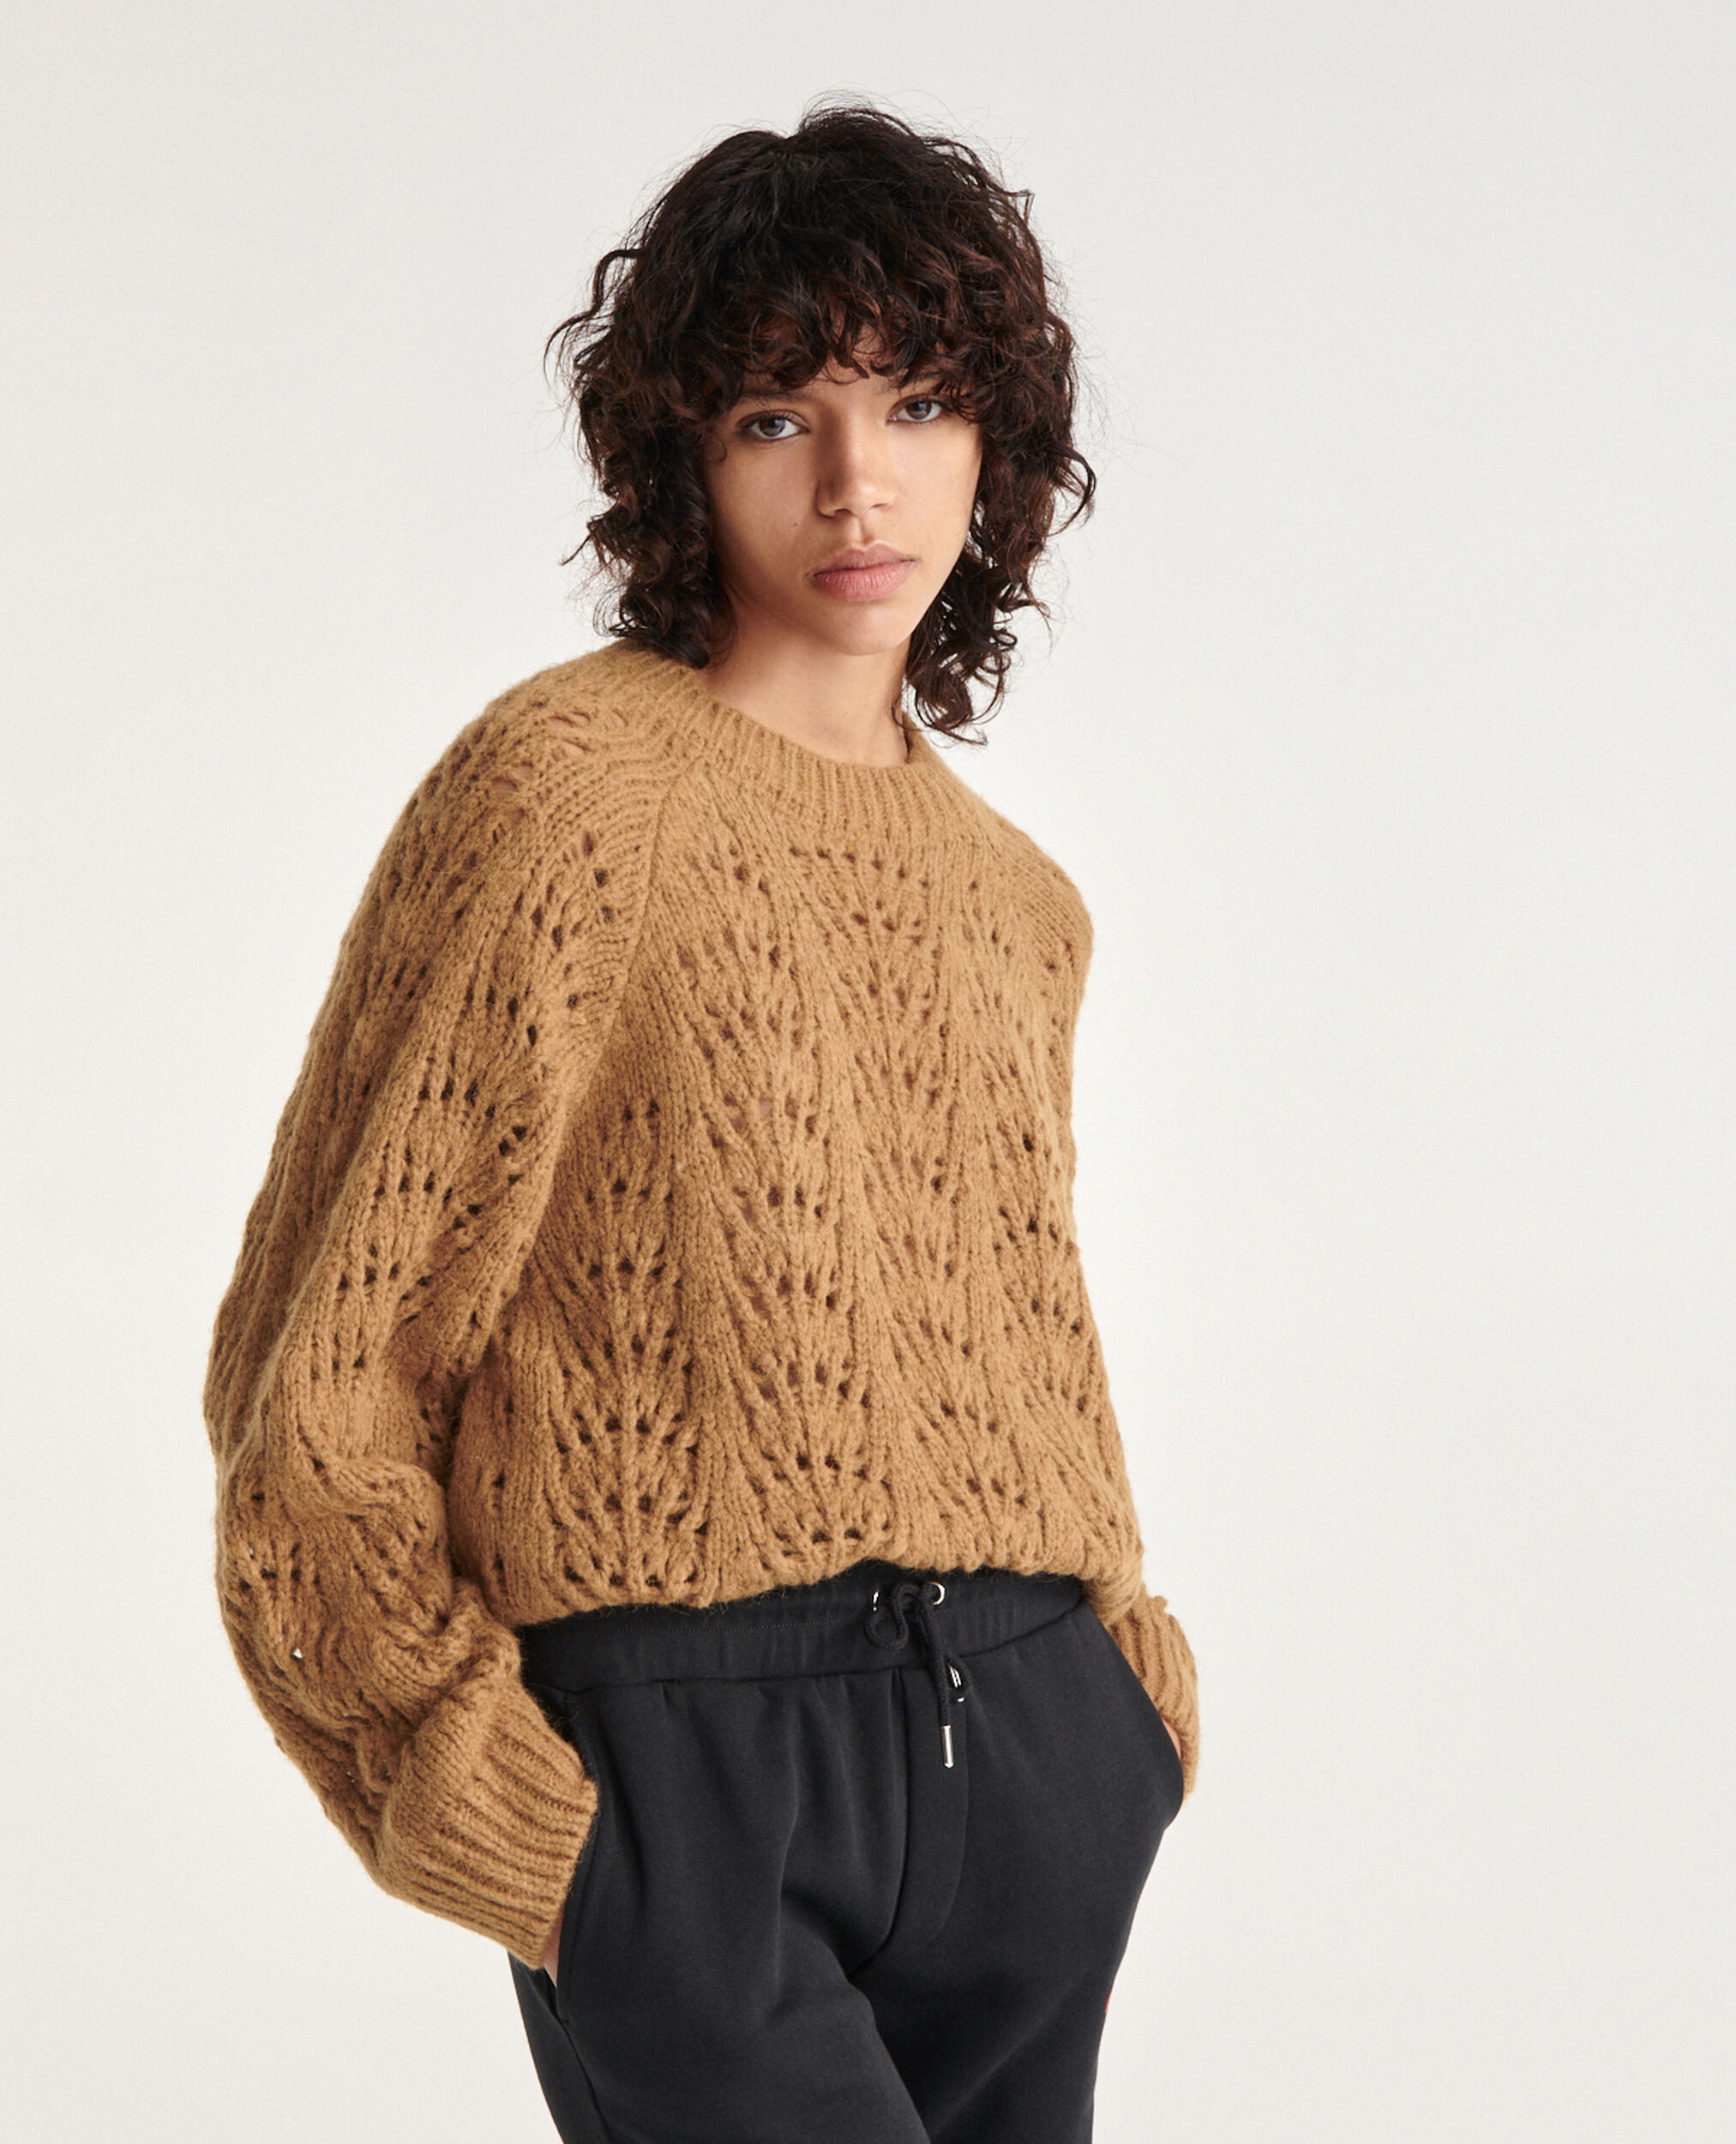 Knit camel sweater with puffed sleeves, BROWN, hi-res image number null